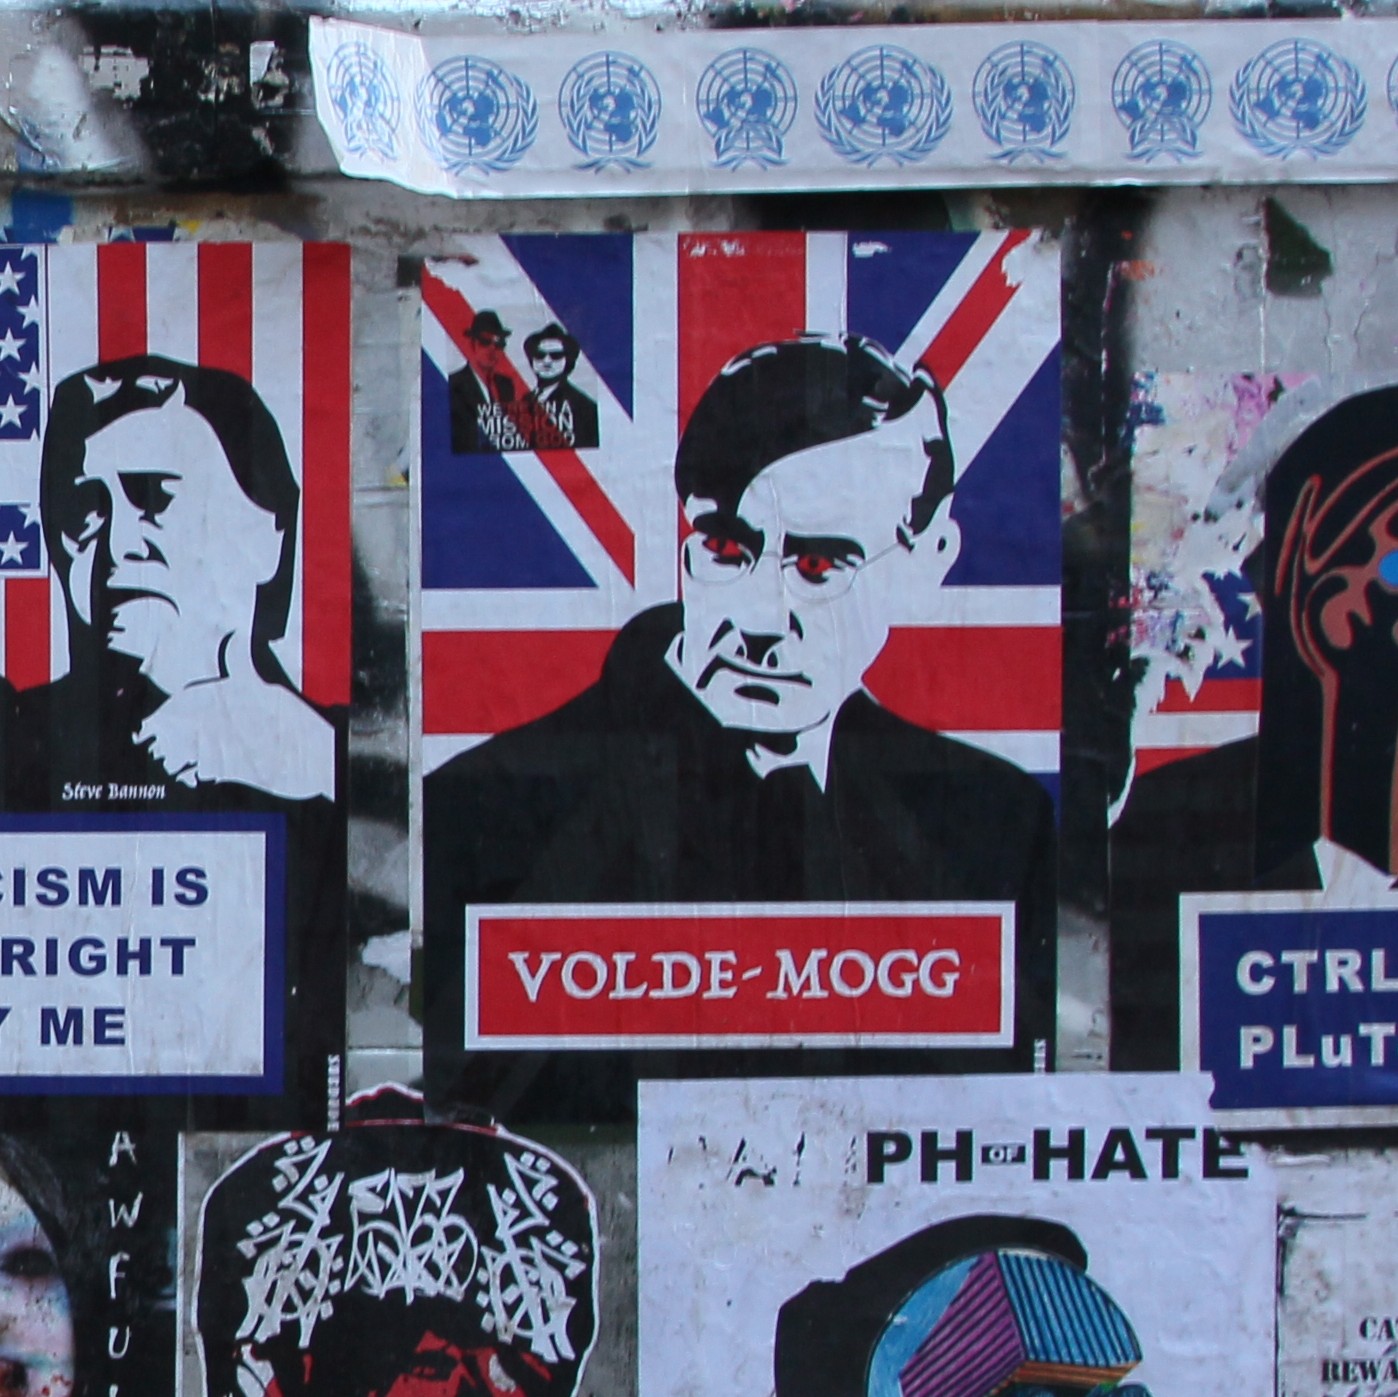 volde-mogg cropped